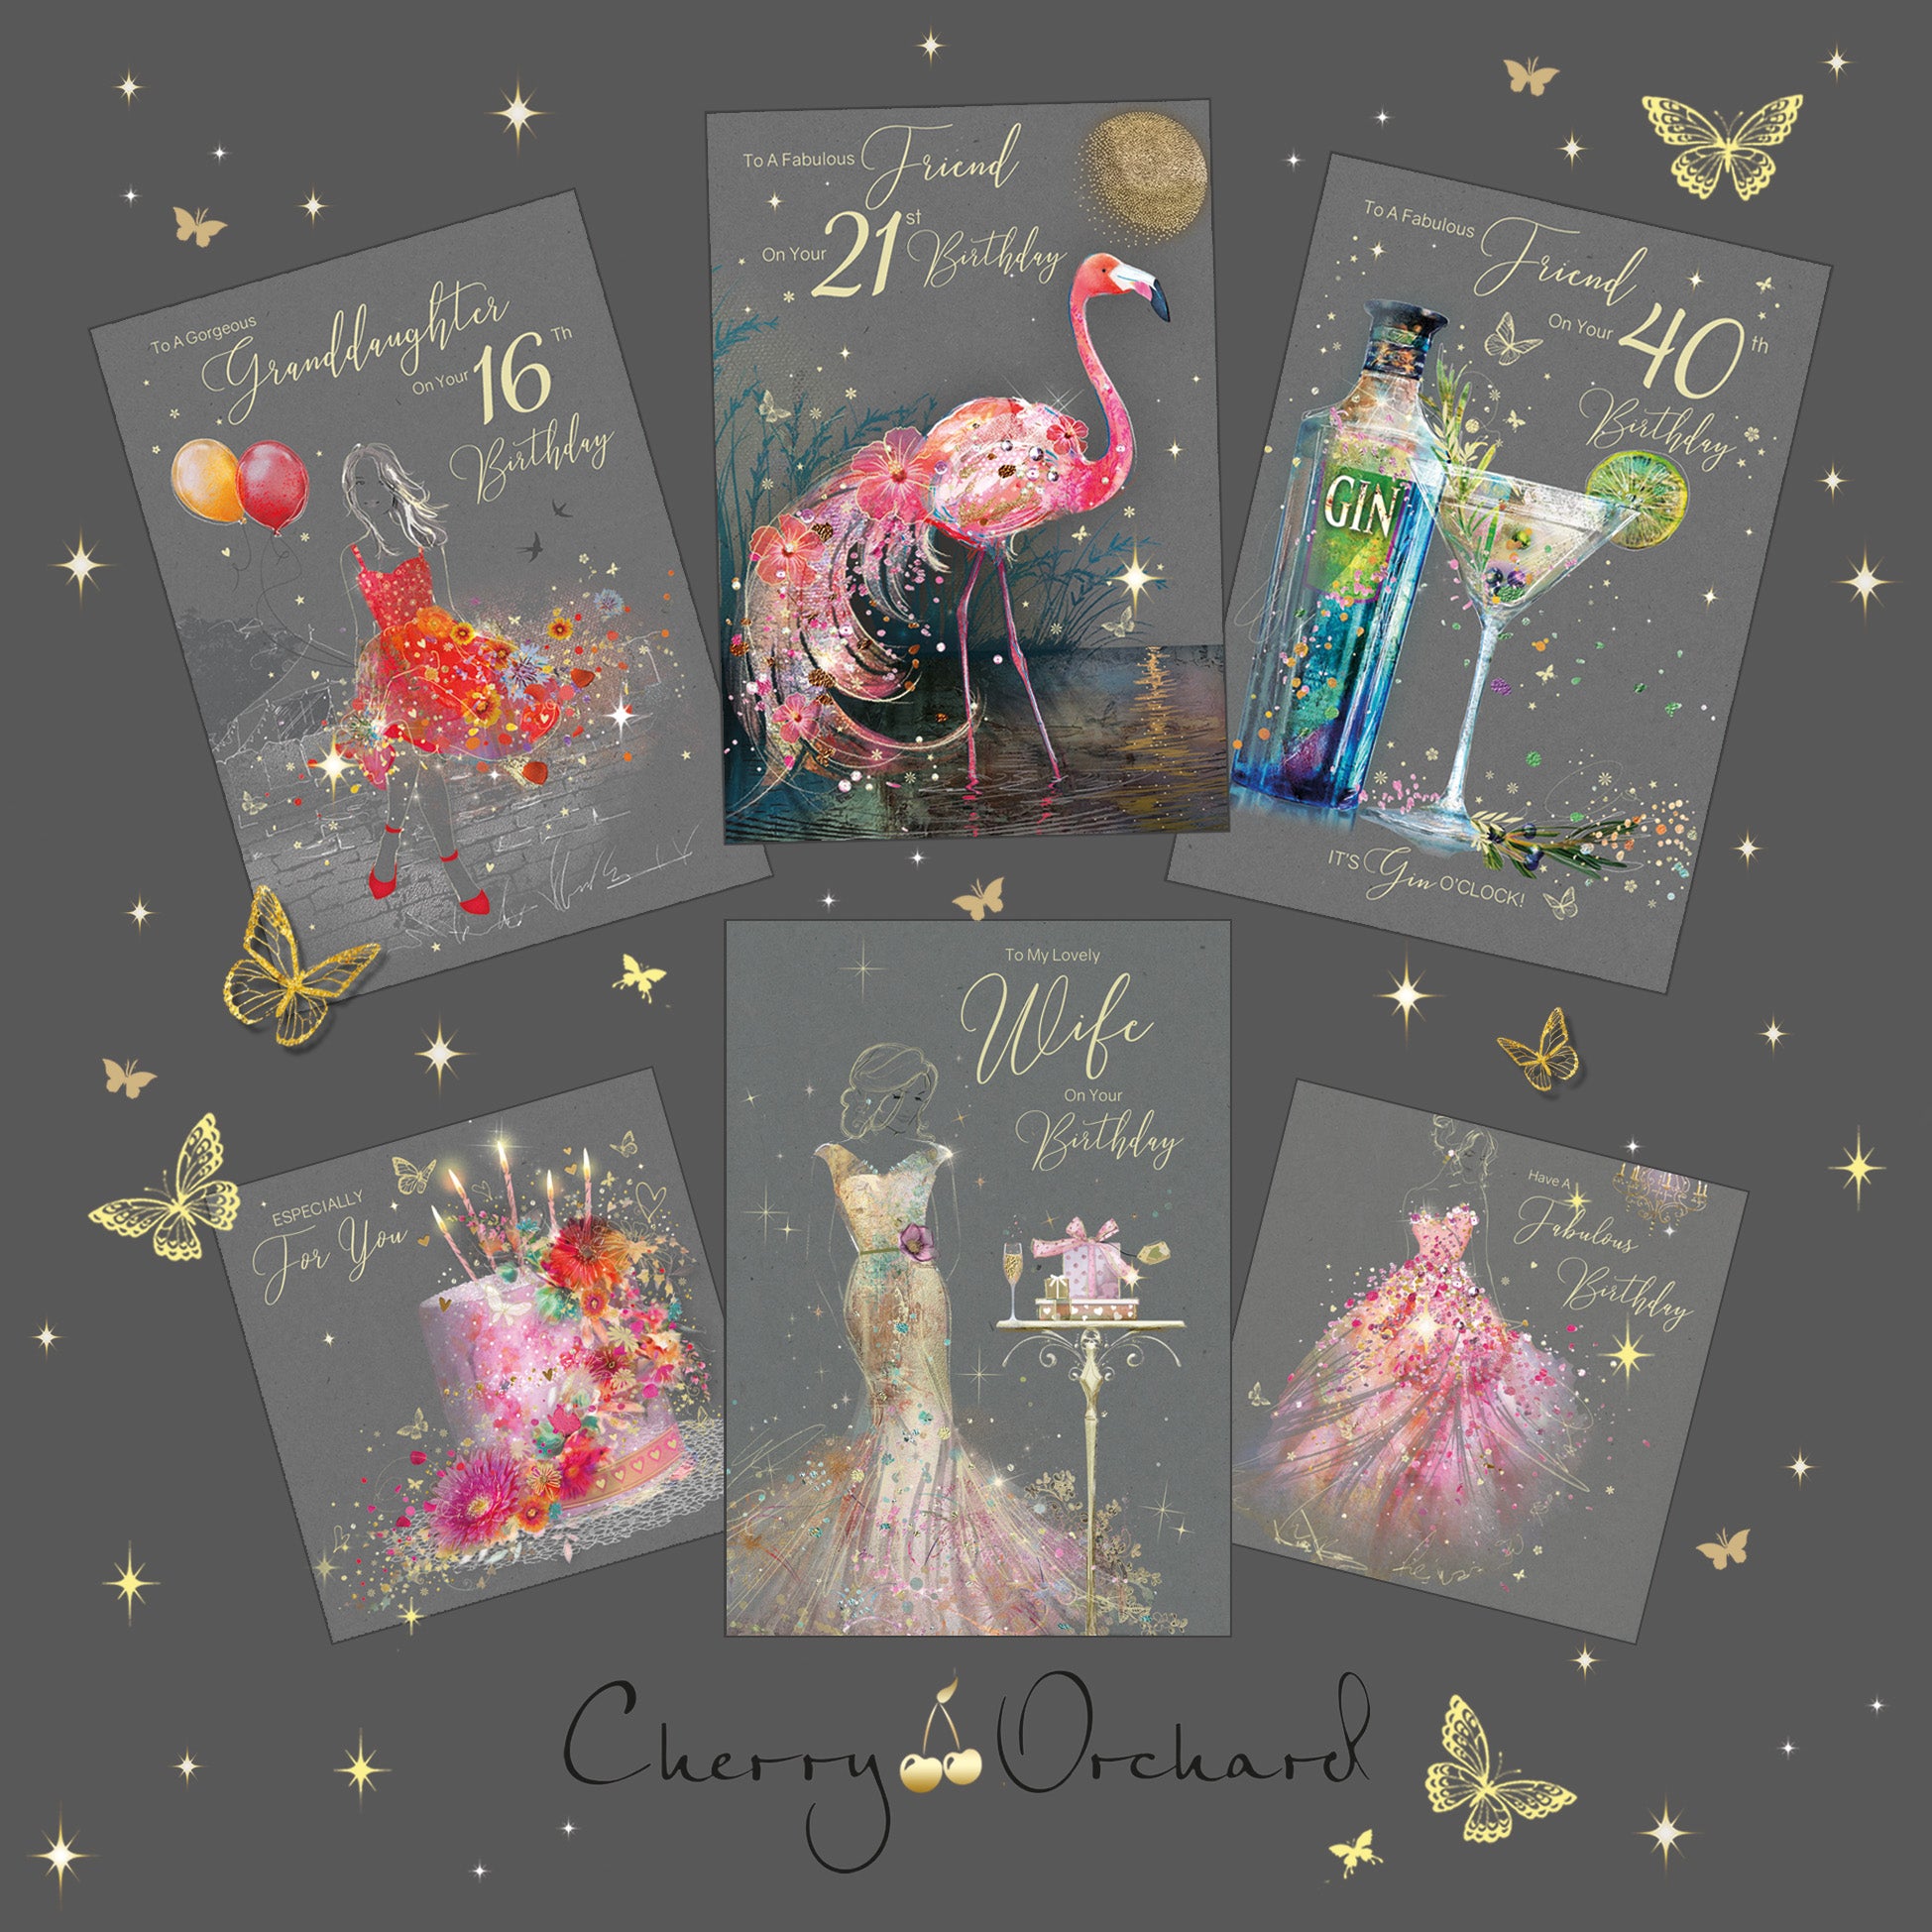 Brand new Luxe greeting cards added to the website!